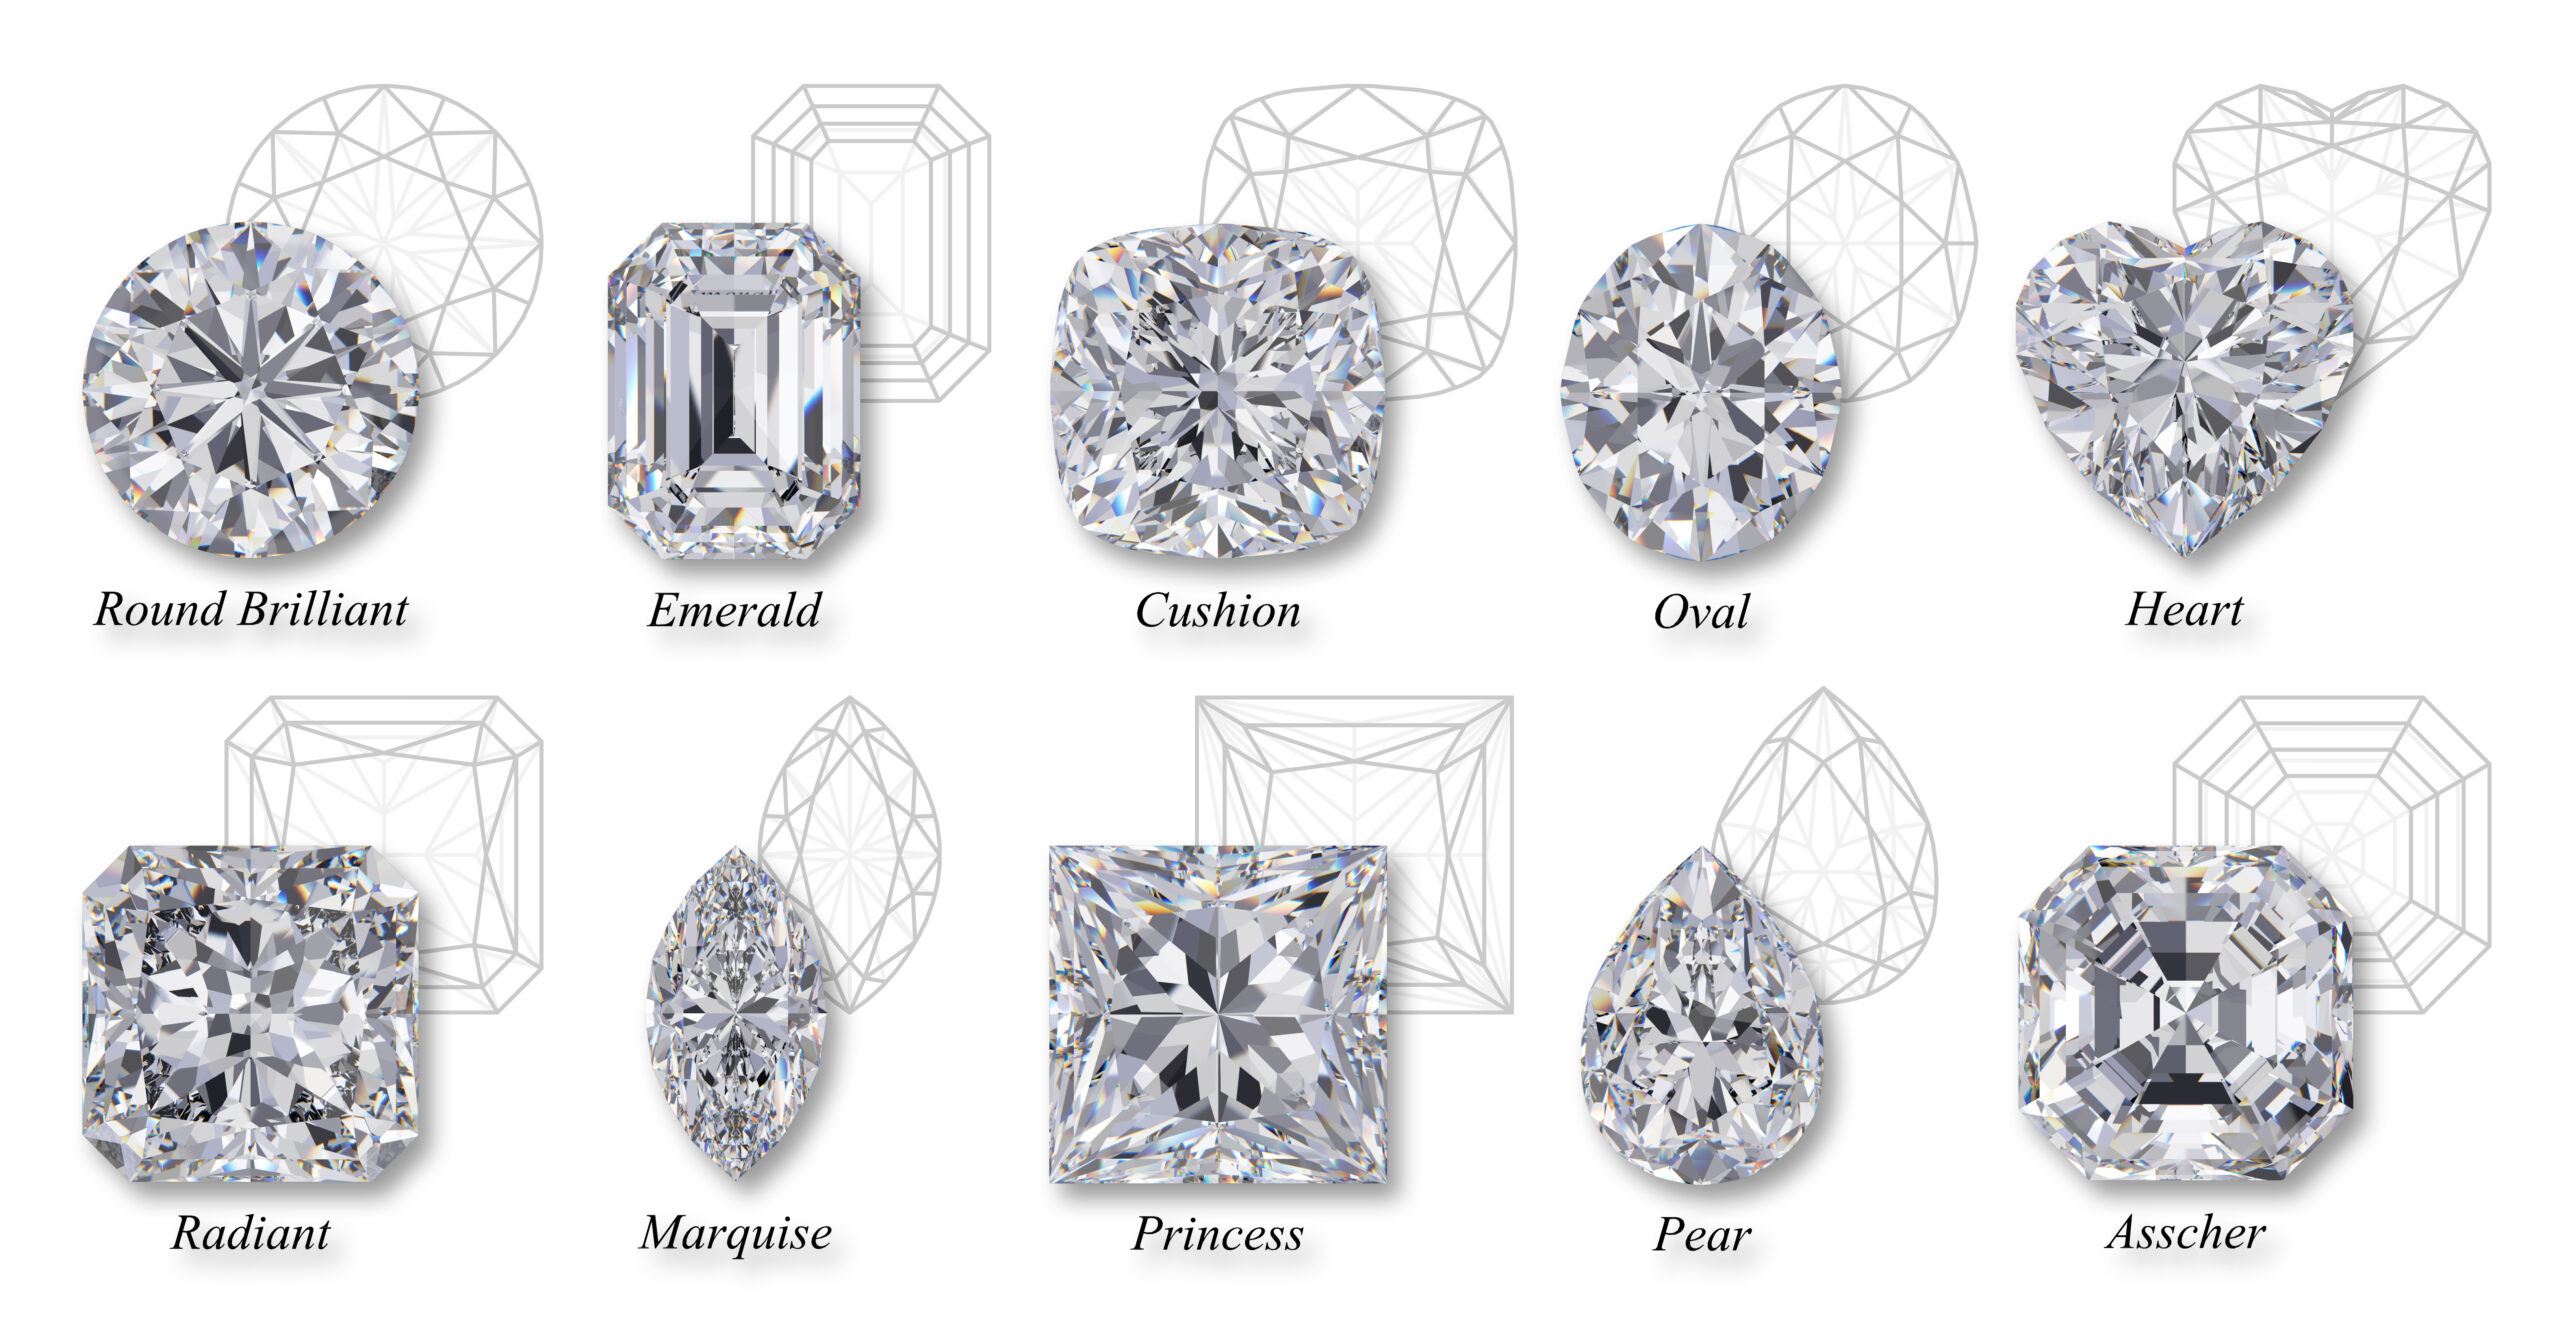 Various images of diamond cuts